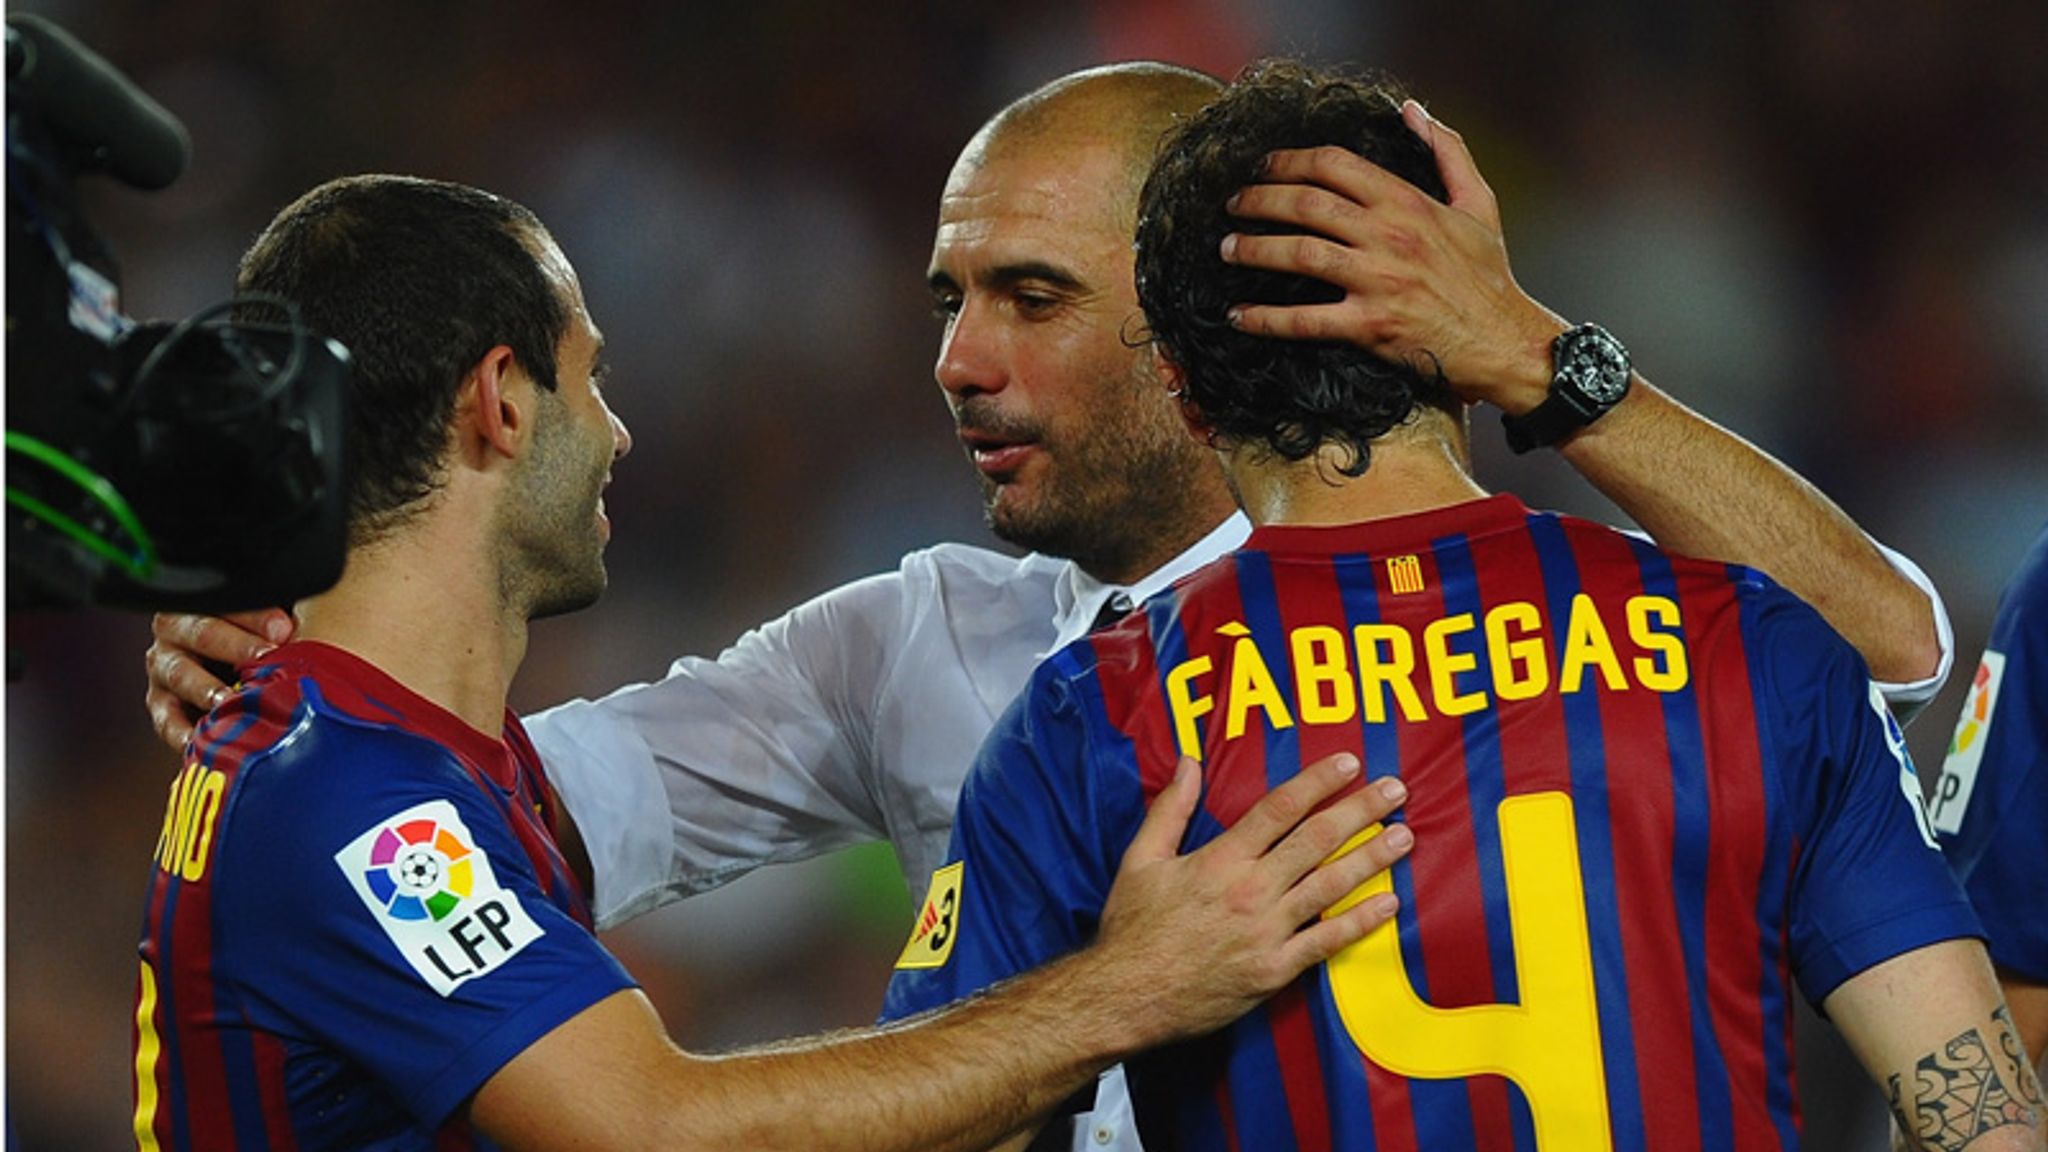 Cesc Fabregas showed why Barcelona cannot afford to let him go